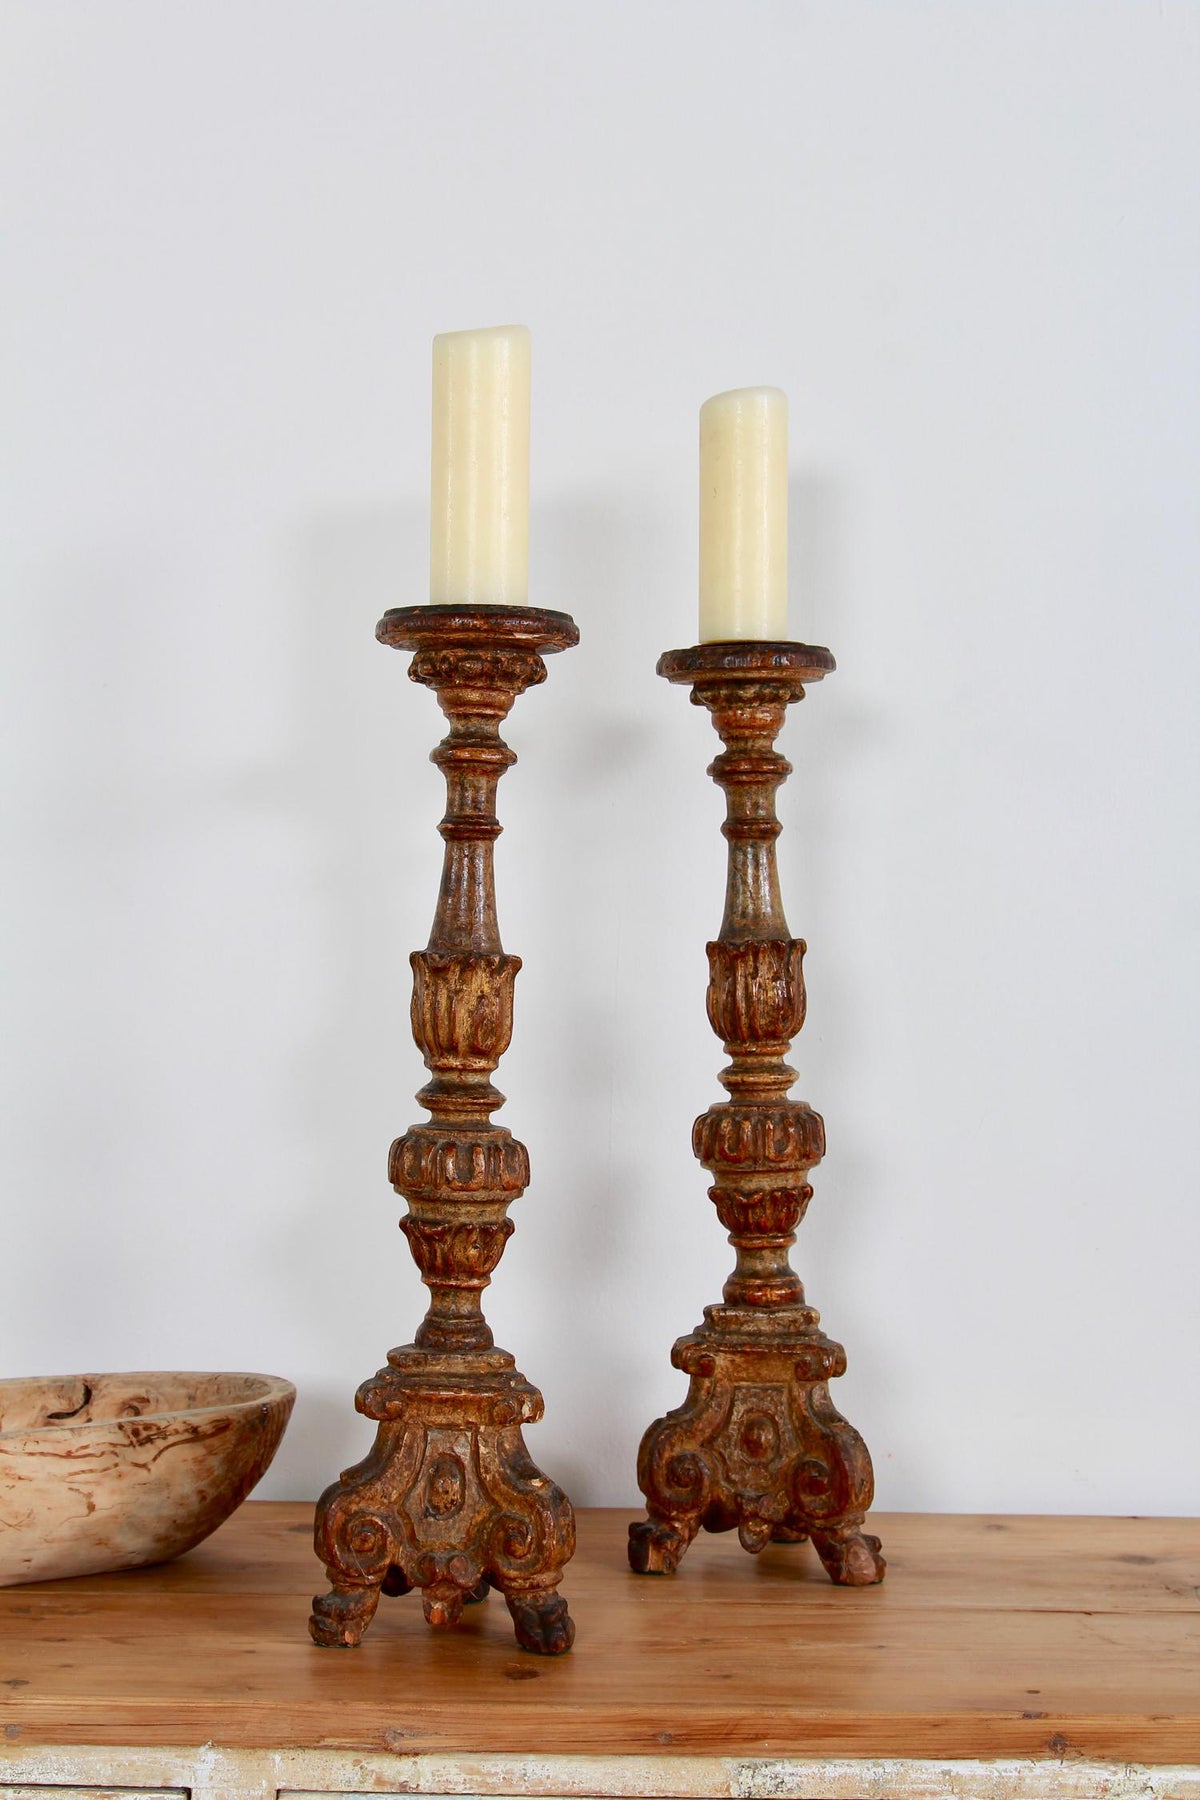 Pair of 18thC French Carved Giltwood Pricket Candlesticks